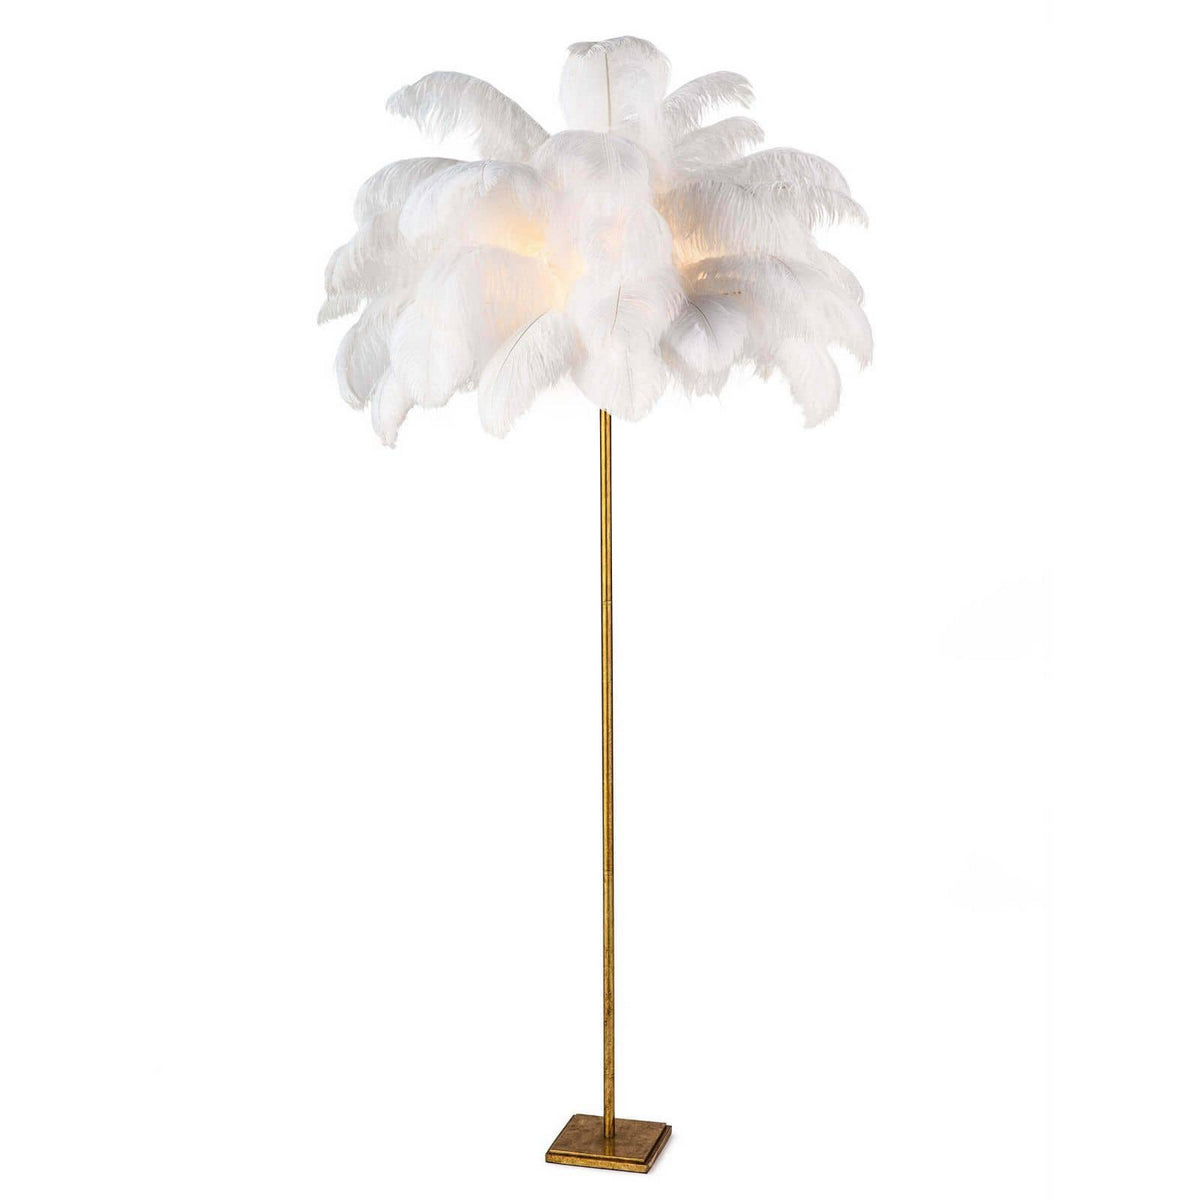 Regina Andrew One Light Floor Lamp from the Josephine collection in Antique Gold Leaf finish